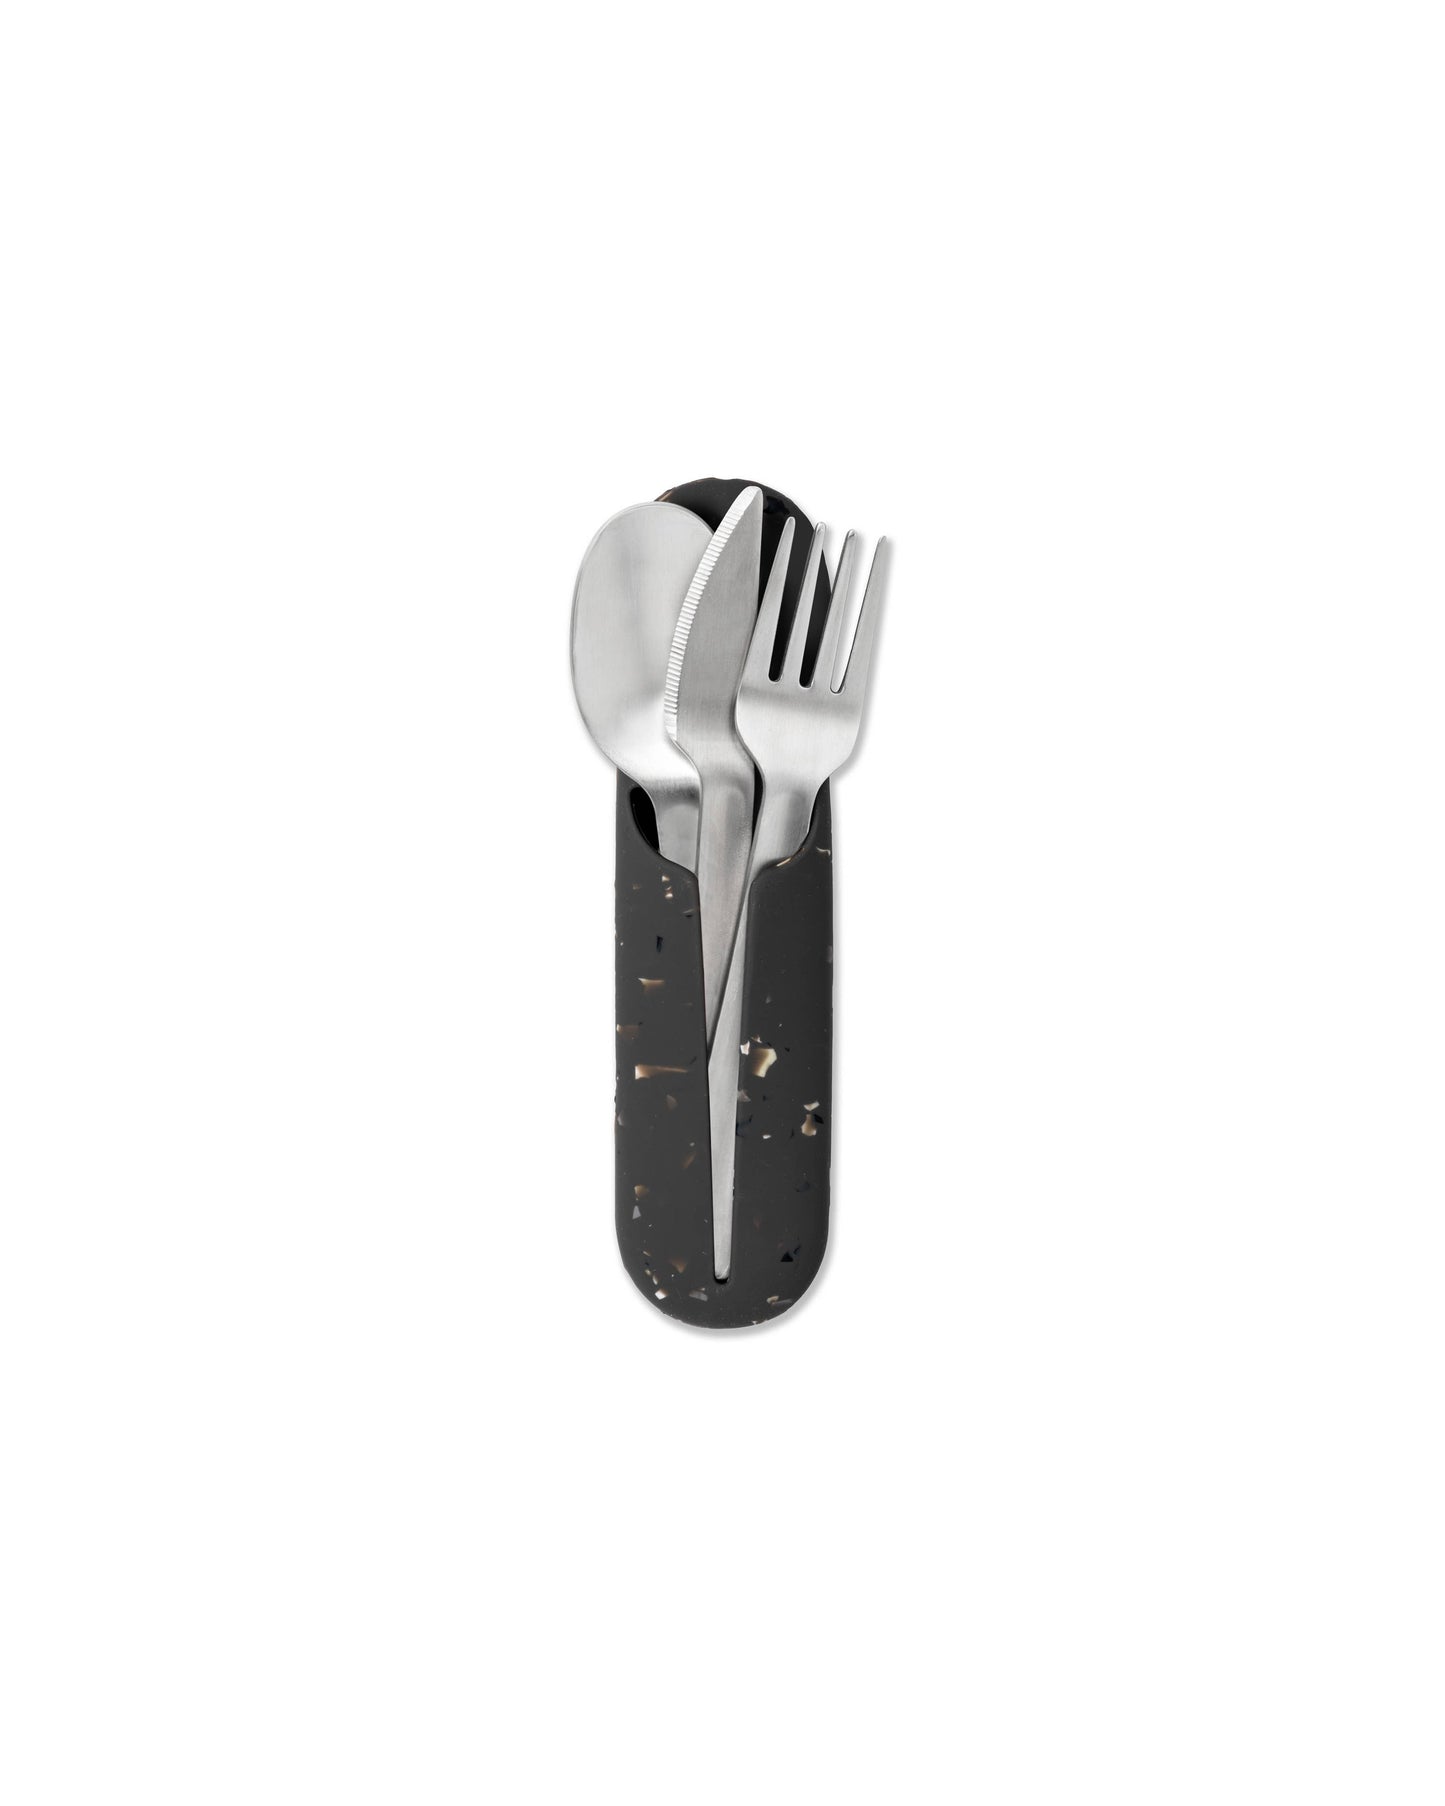 Porter Reusable Utensils Set in Silicone Carry Case  W&P   -better made easy-eco-friendly-sustainable-gifting